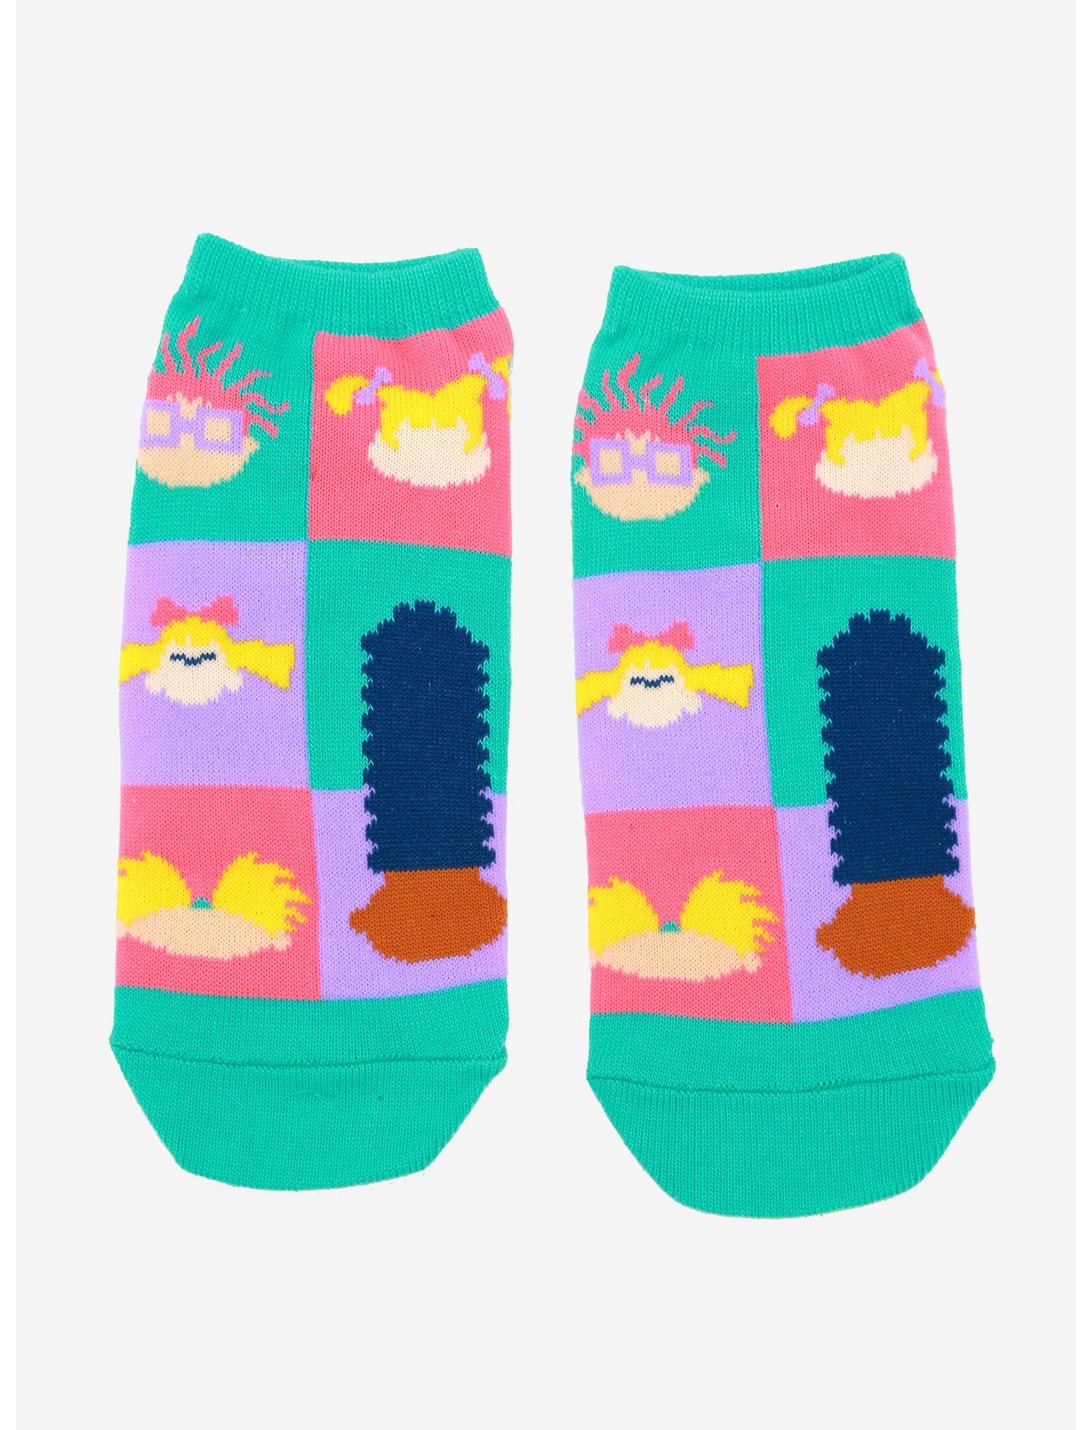 Nickelodeon Characters Silhouettes No-Show Socks, , hi-res